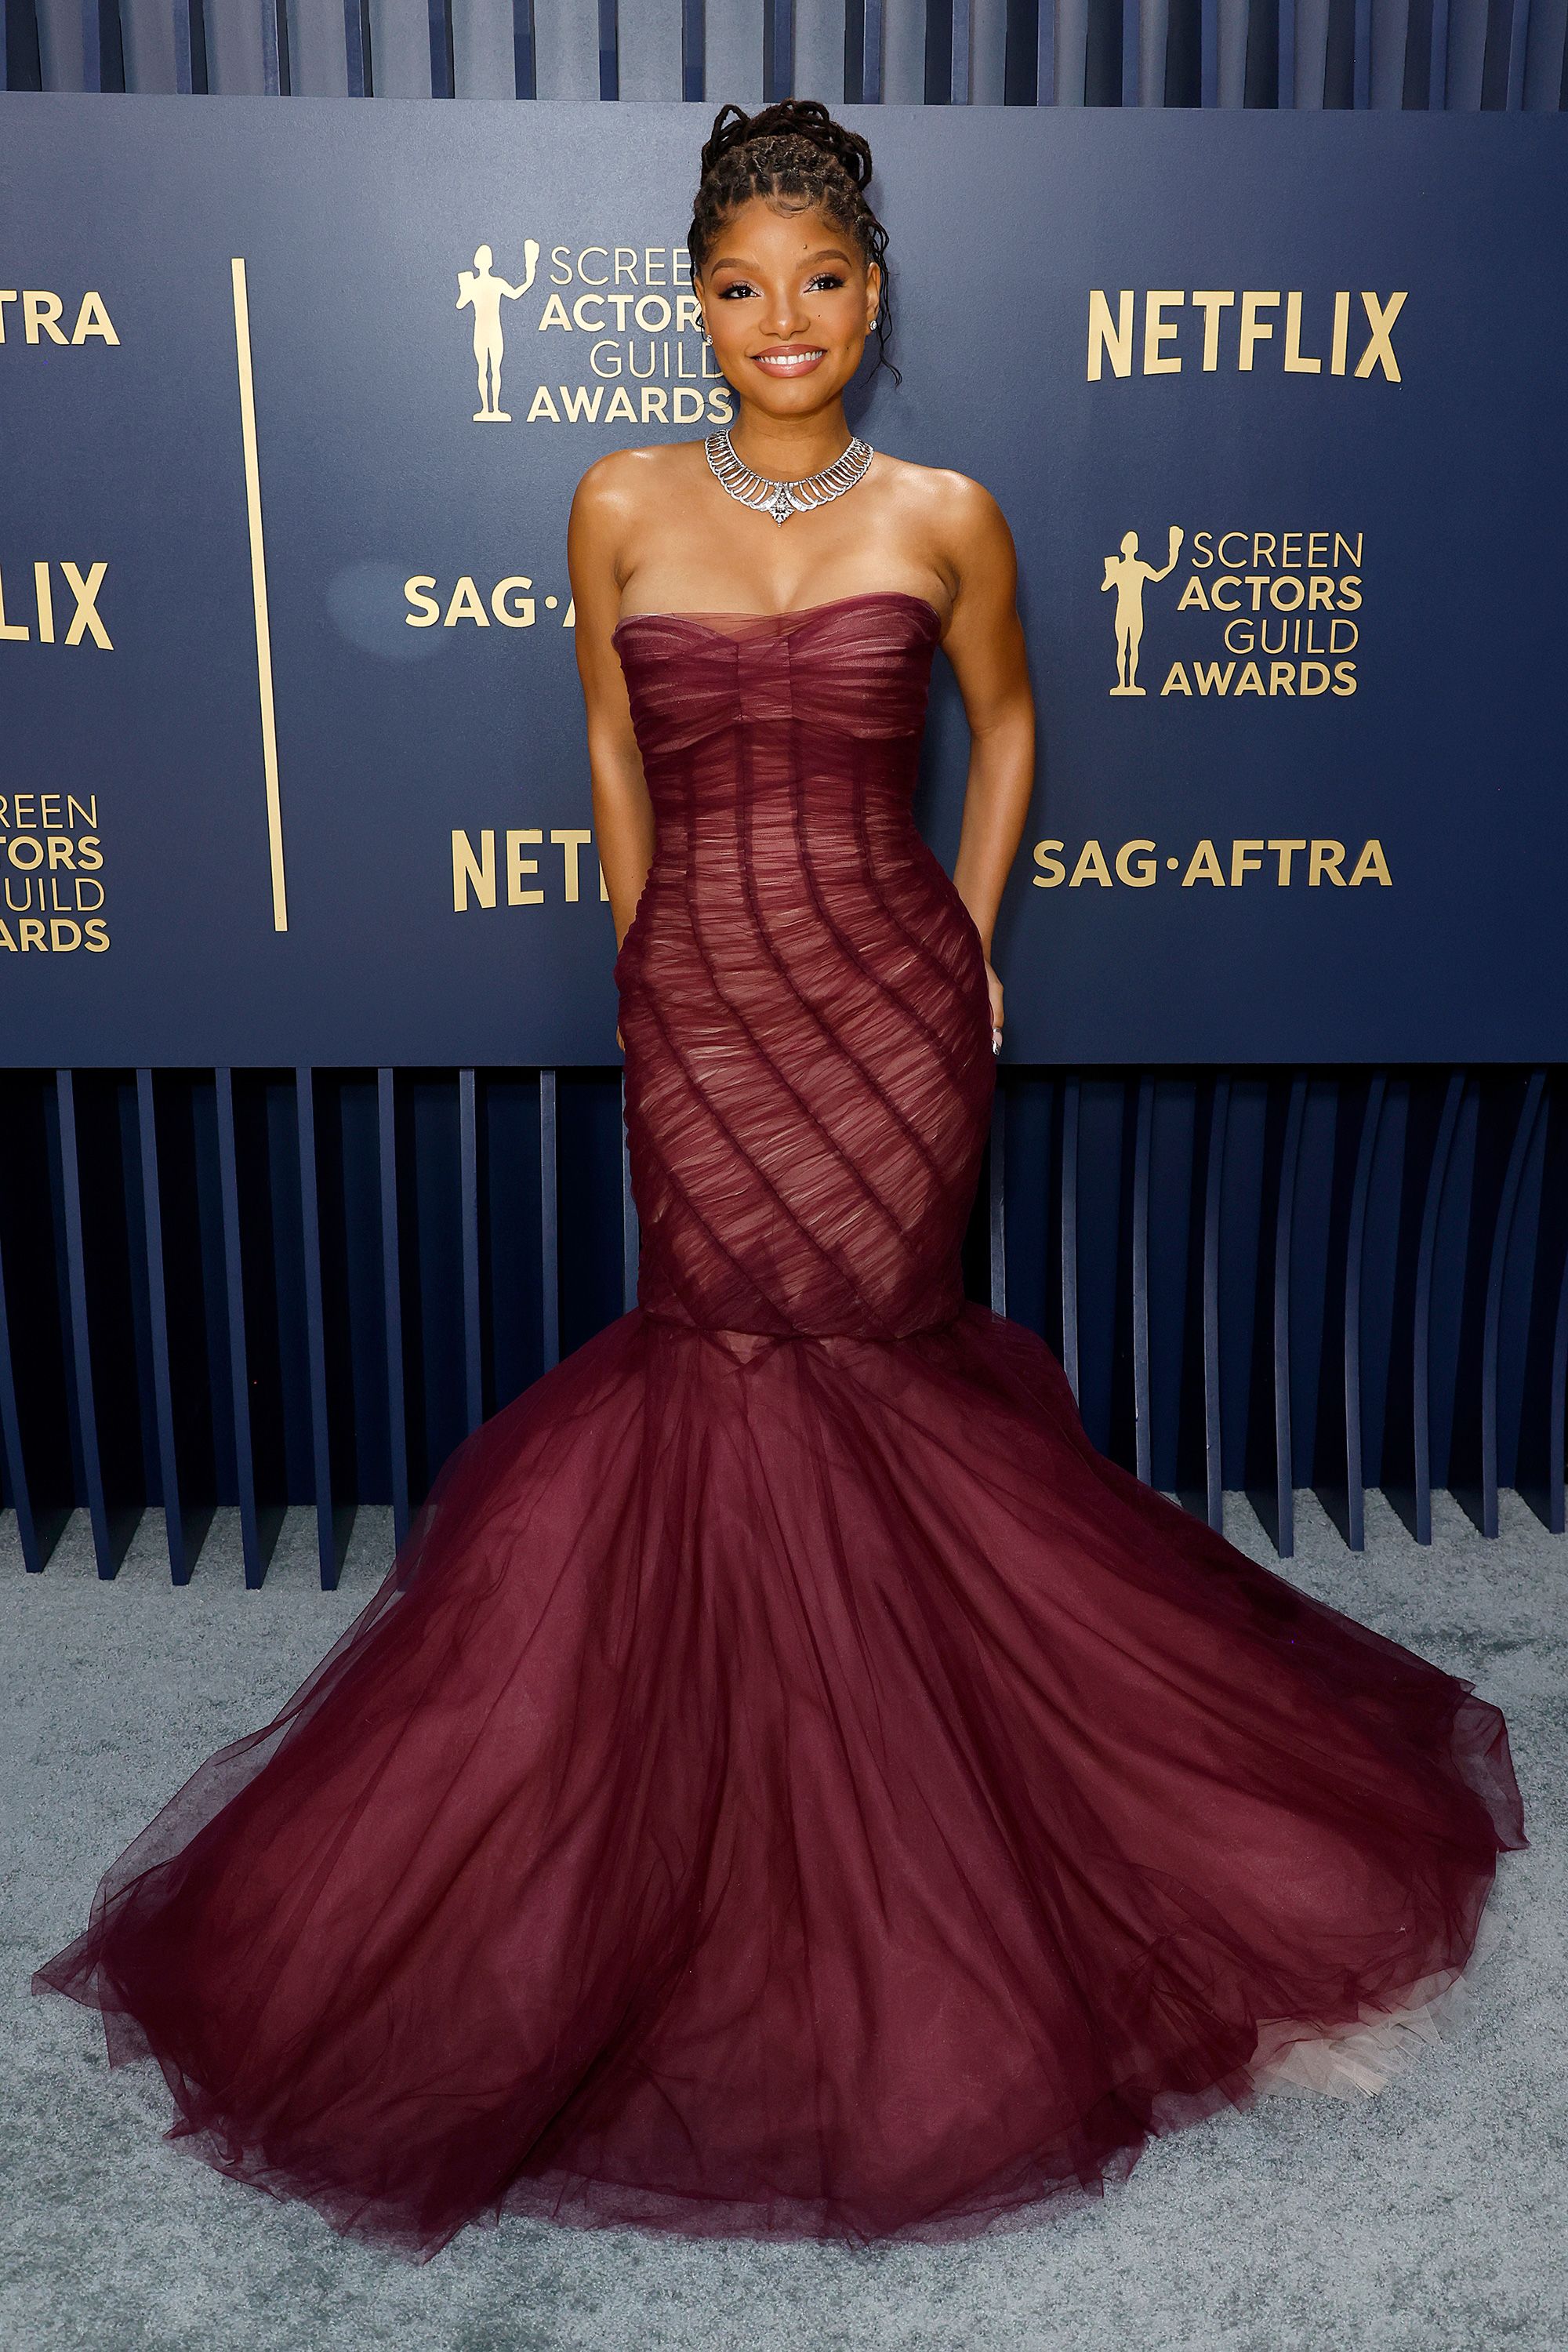 A mermaid moment for Halle Bailey, in a maroon tulle fishtail gown by Dolce & Gabbana.